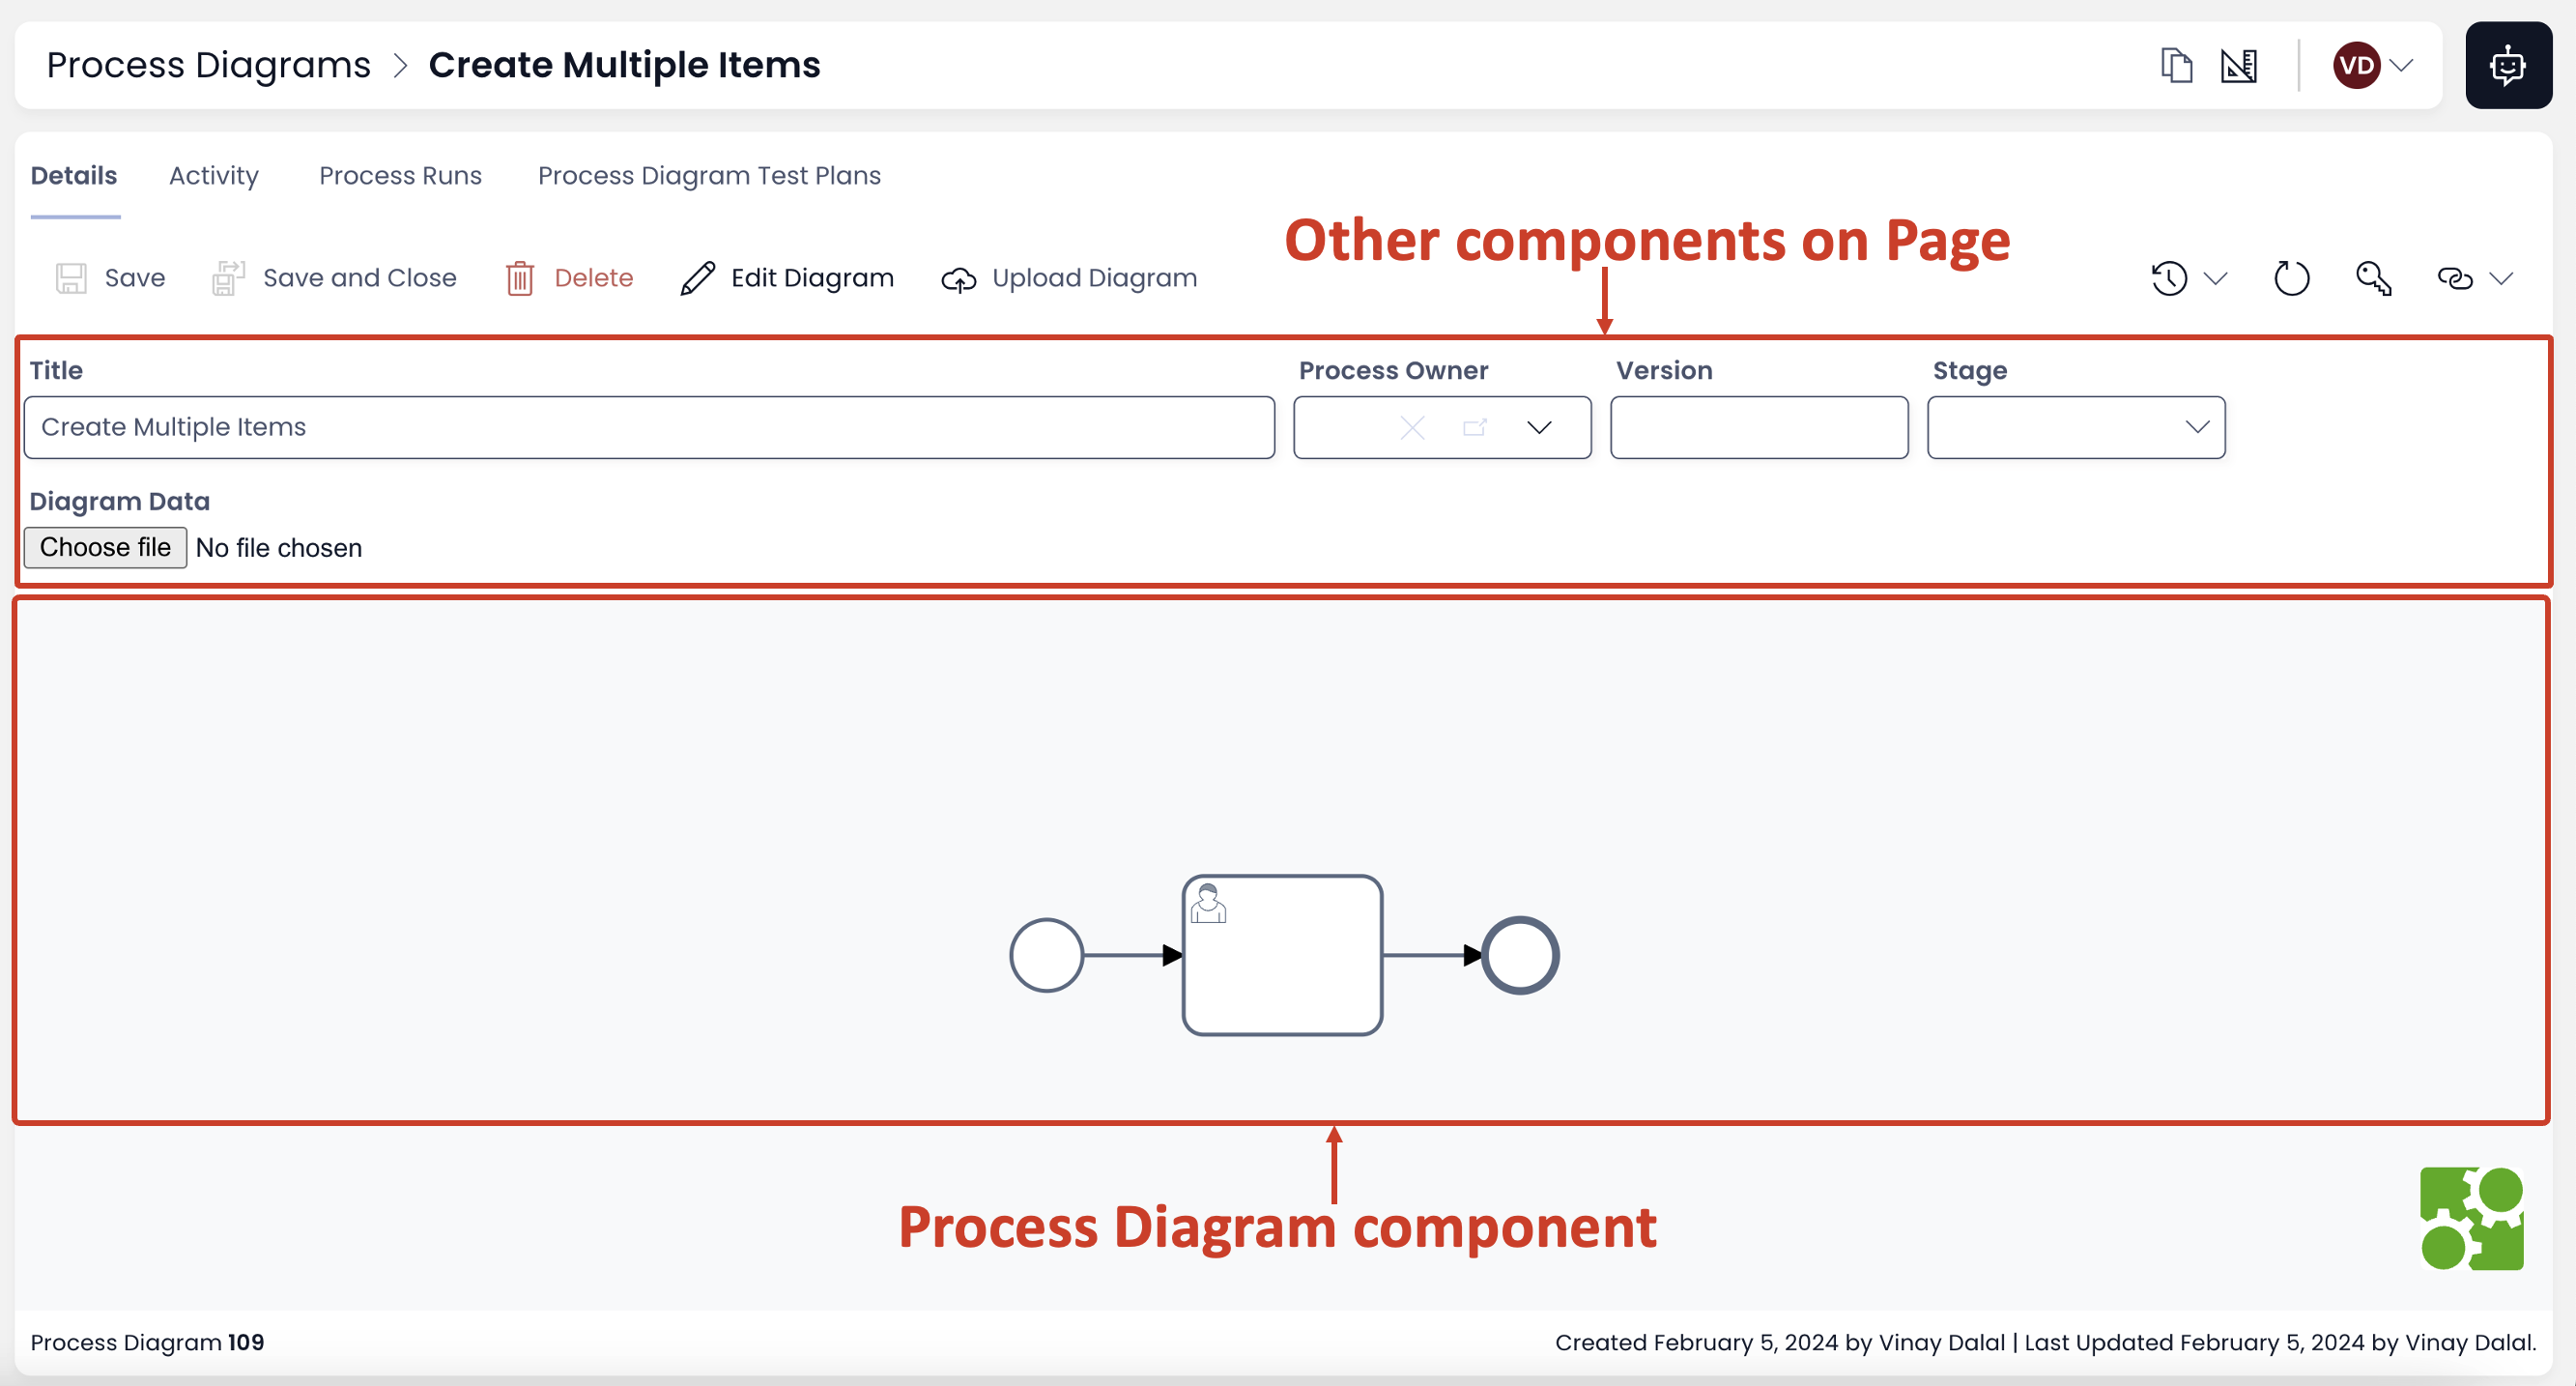 Image showing another example of a Page where Process Diagram Component present with other elements